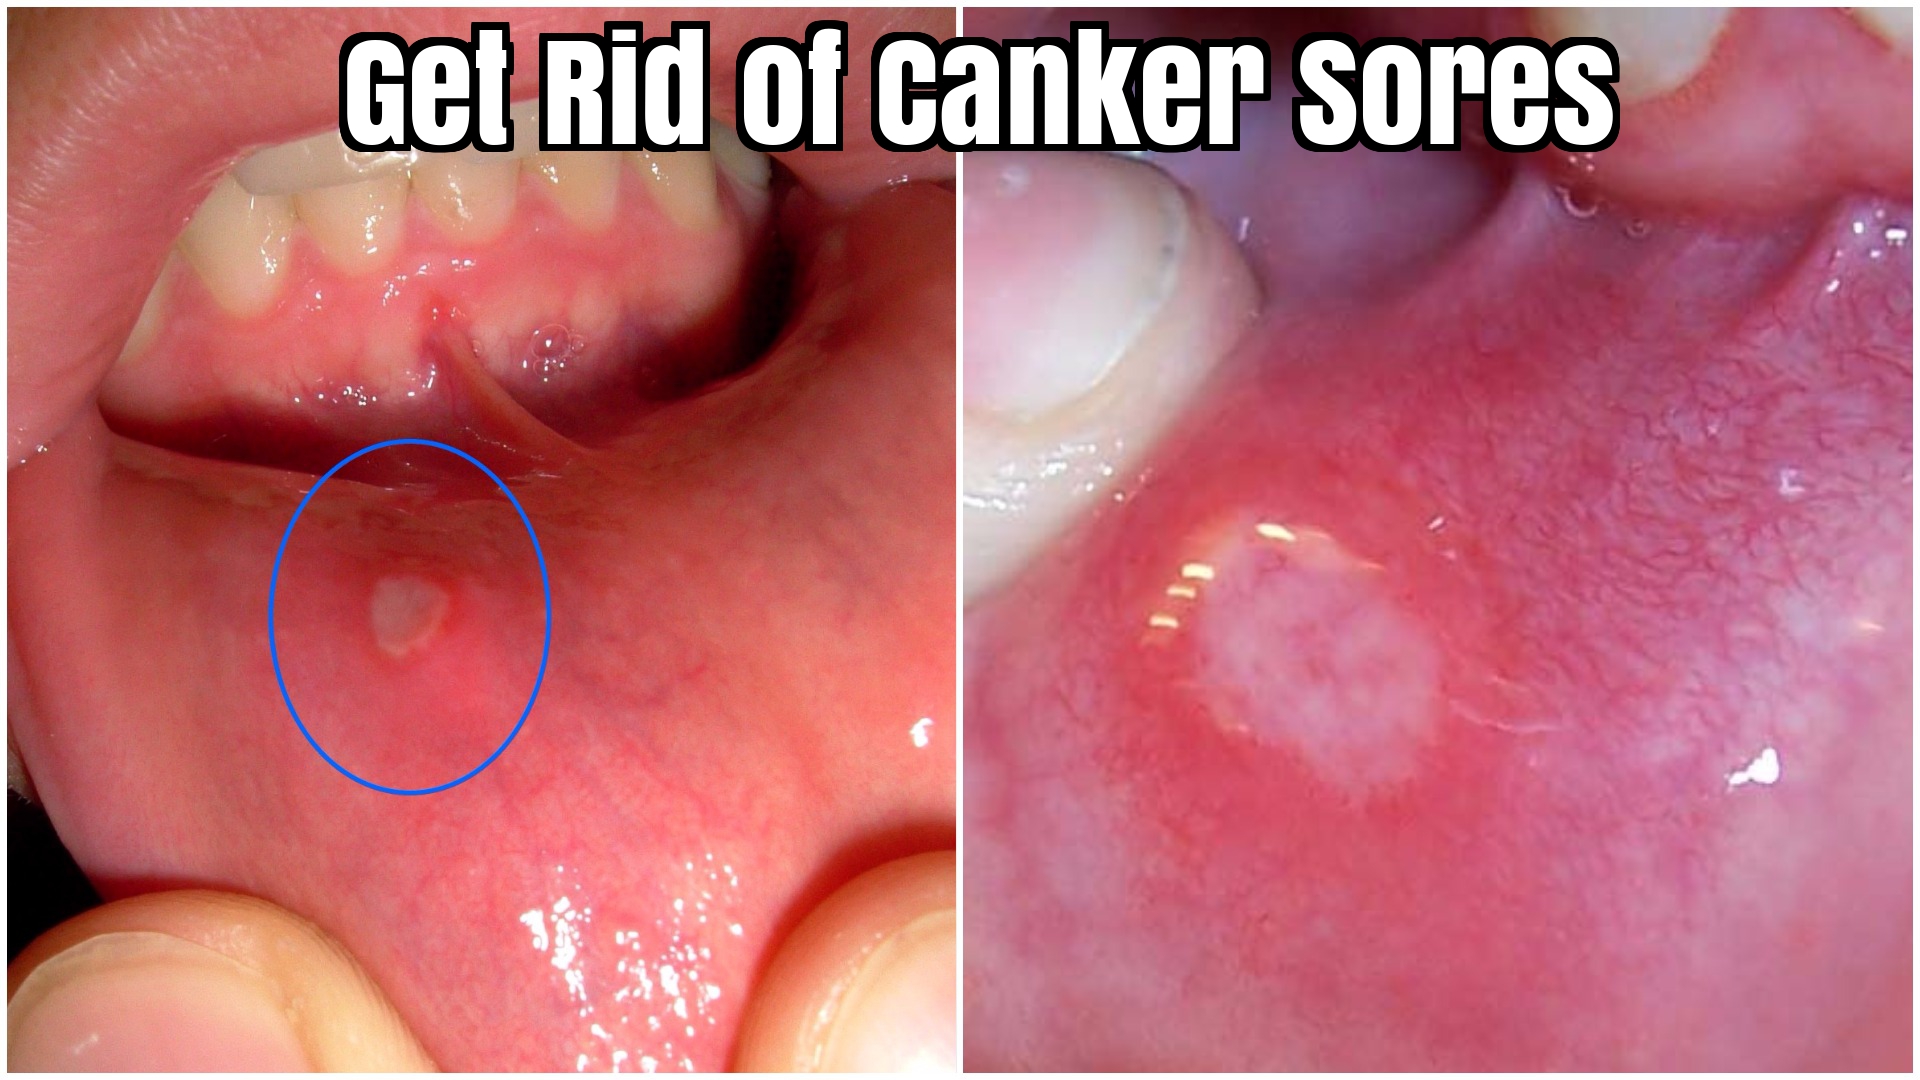 How to Get Rid of Canker Sores Fast? Home Remedies to Get Rid of Canker Sores